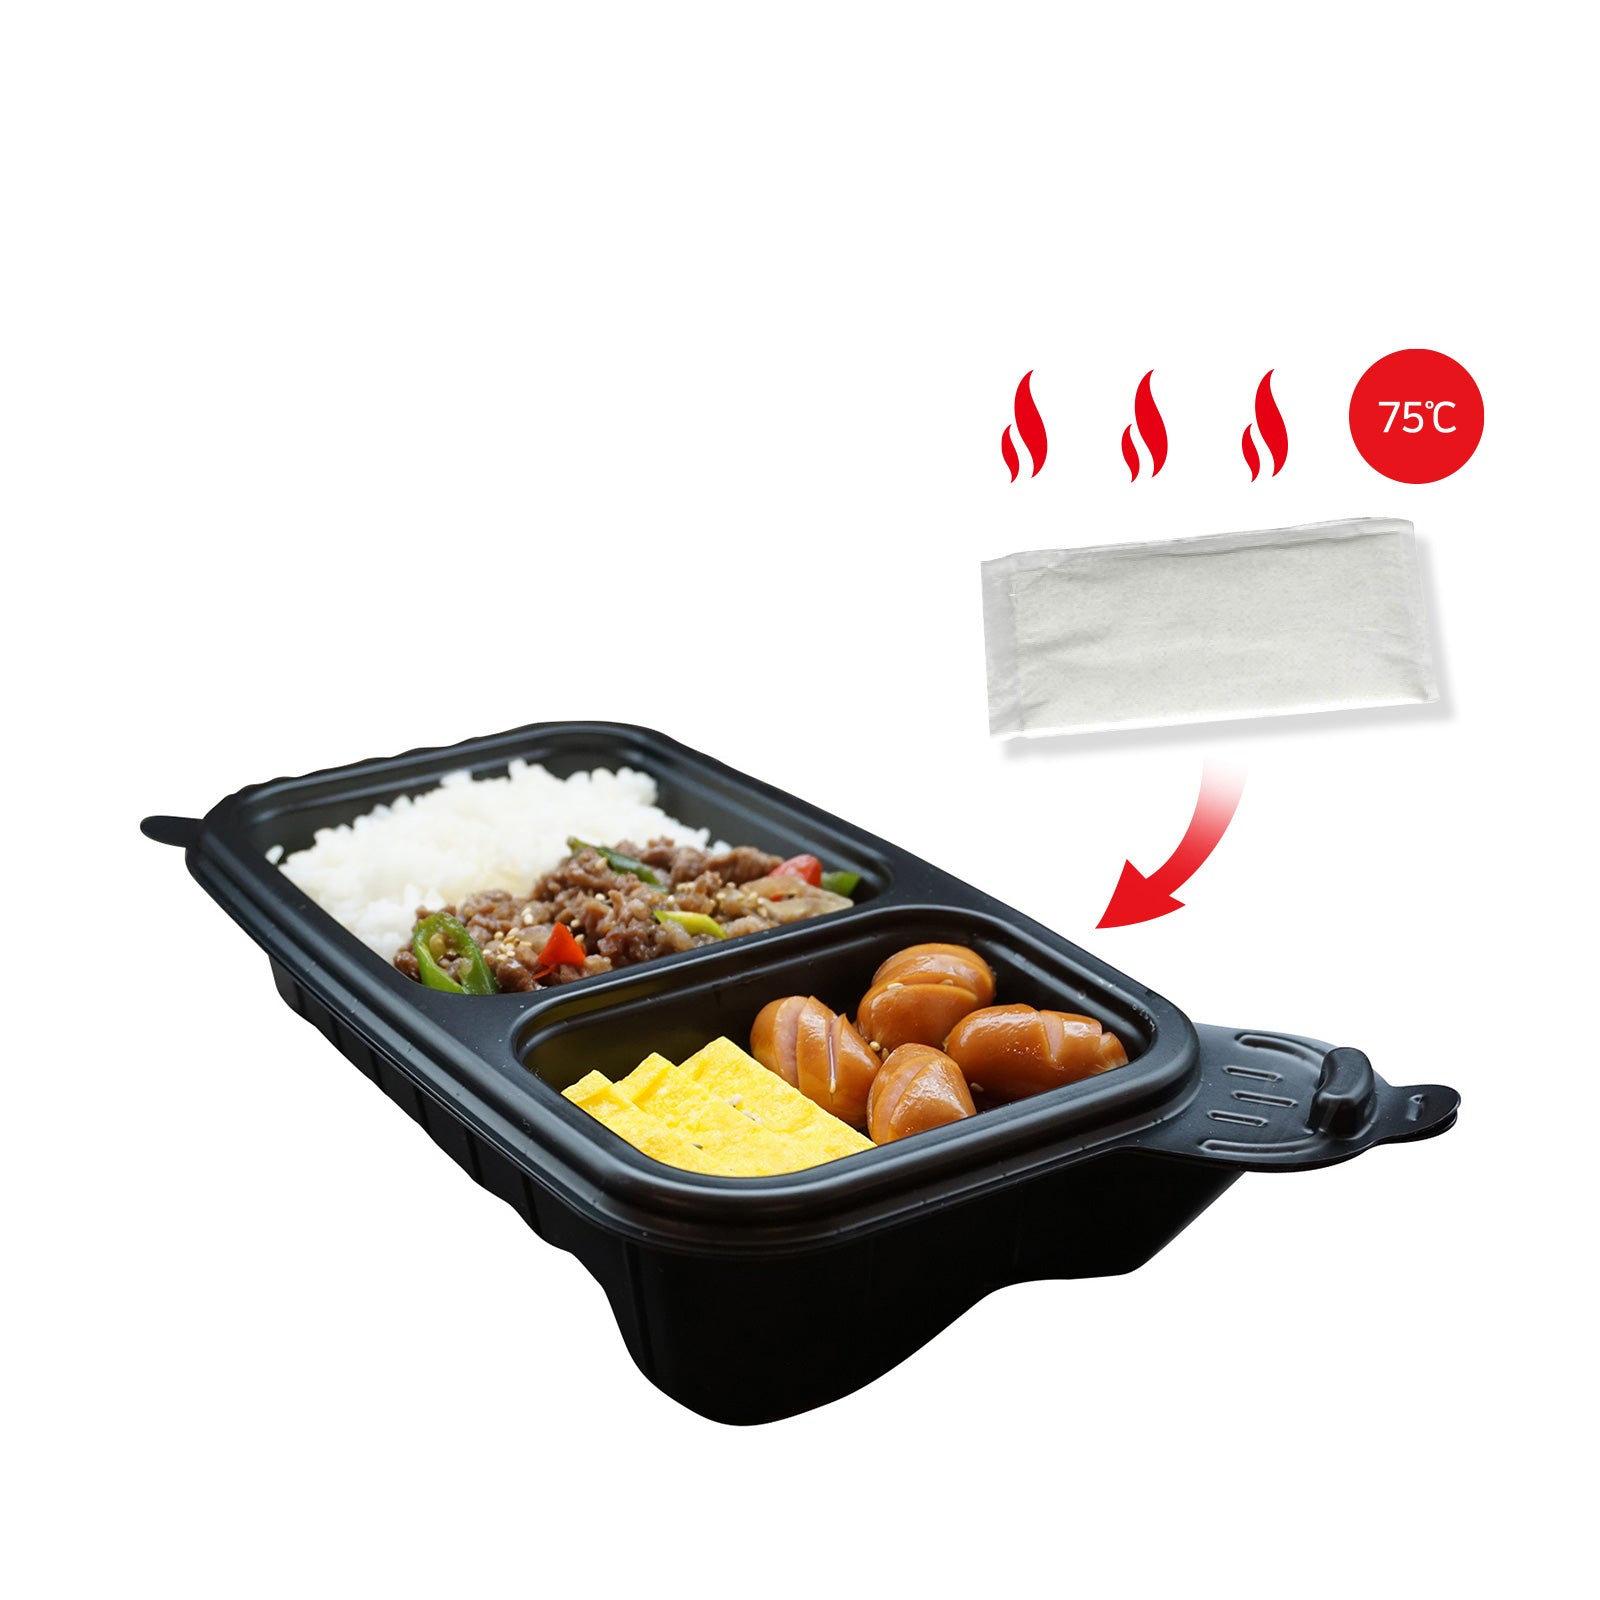 60 Pack Dalat Heating Lunch Box Container 26cm B + Heating Bag